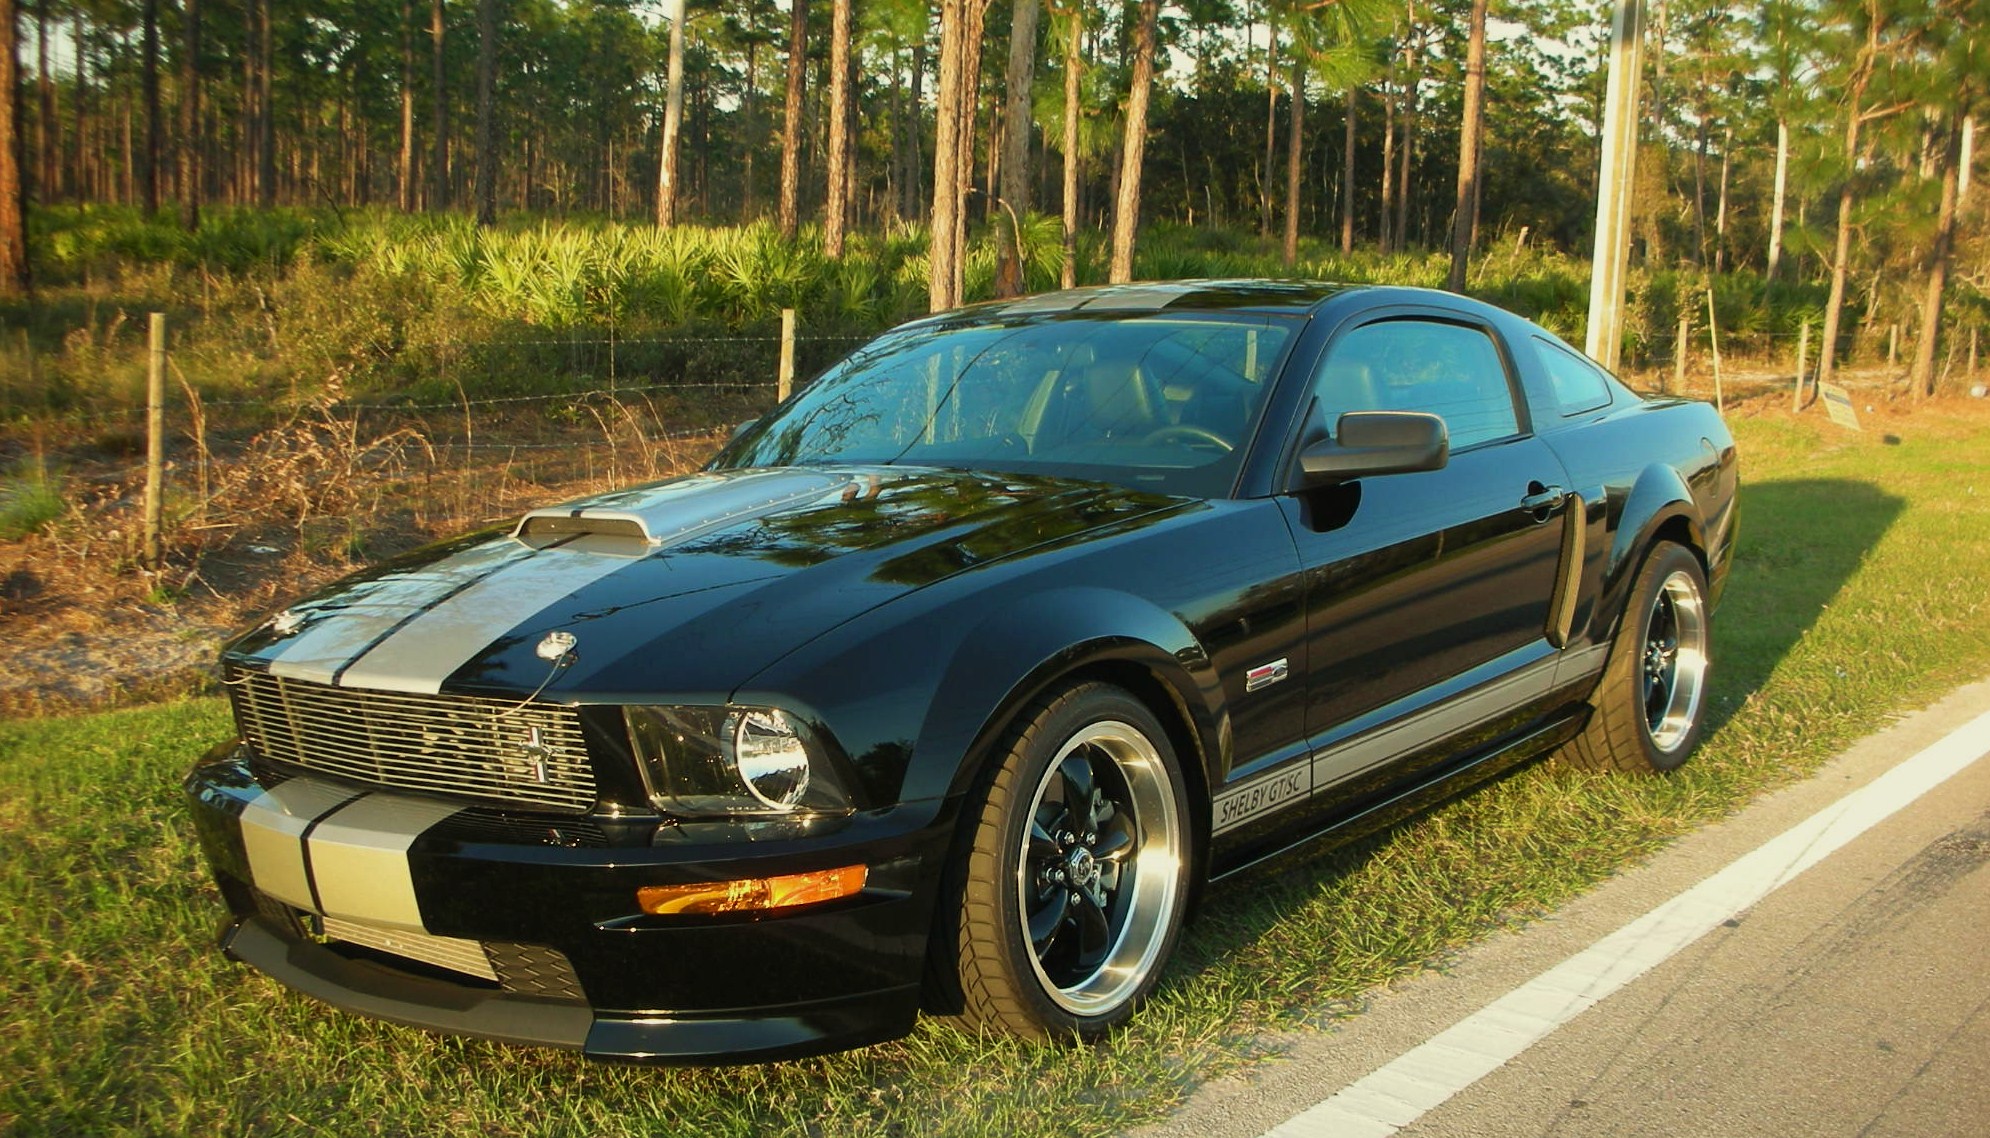 2007 Ford shelby gt specifications #6